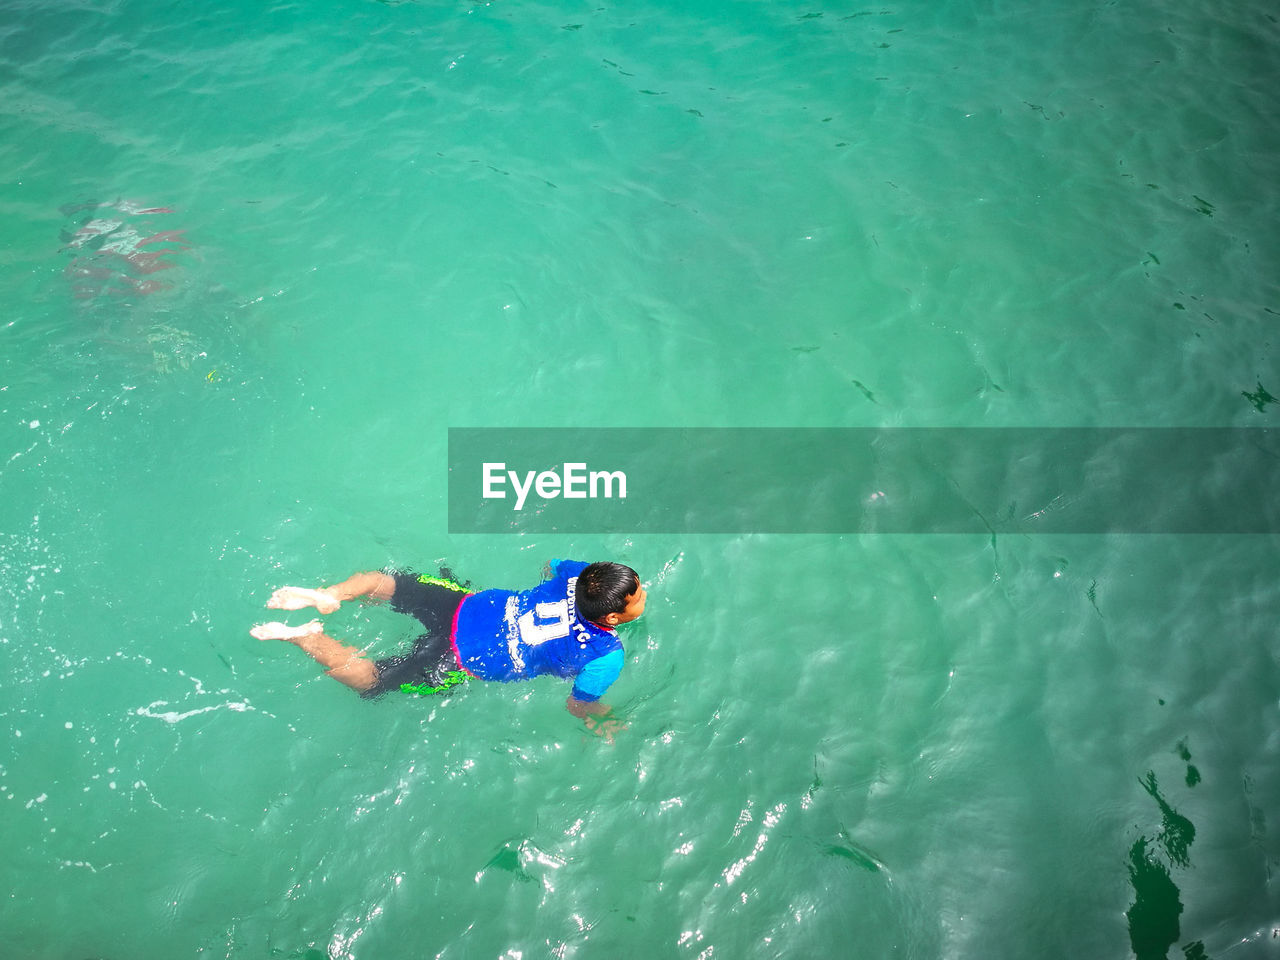 HIGH ANGLE VIEW OF MAN SWIMMING IN WATER